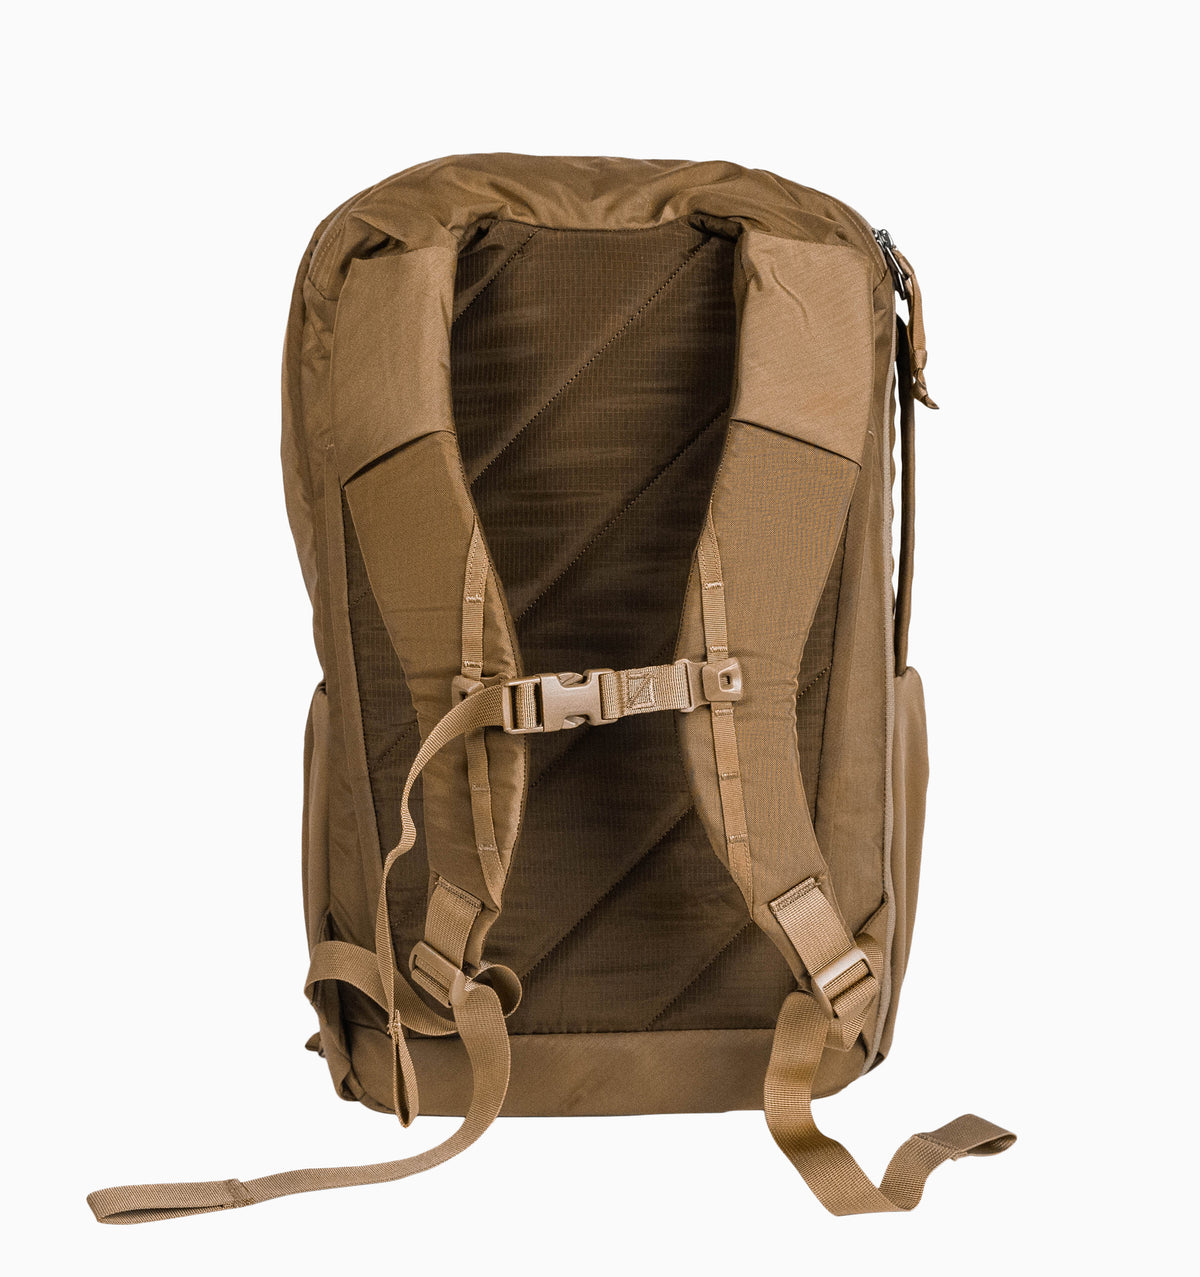 Evergoods 16" Civic Travel Bag 26L - Coyote Brown